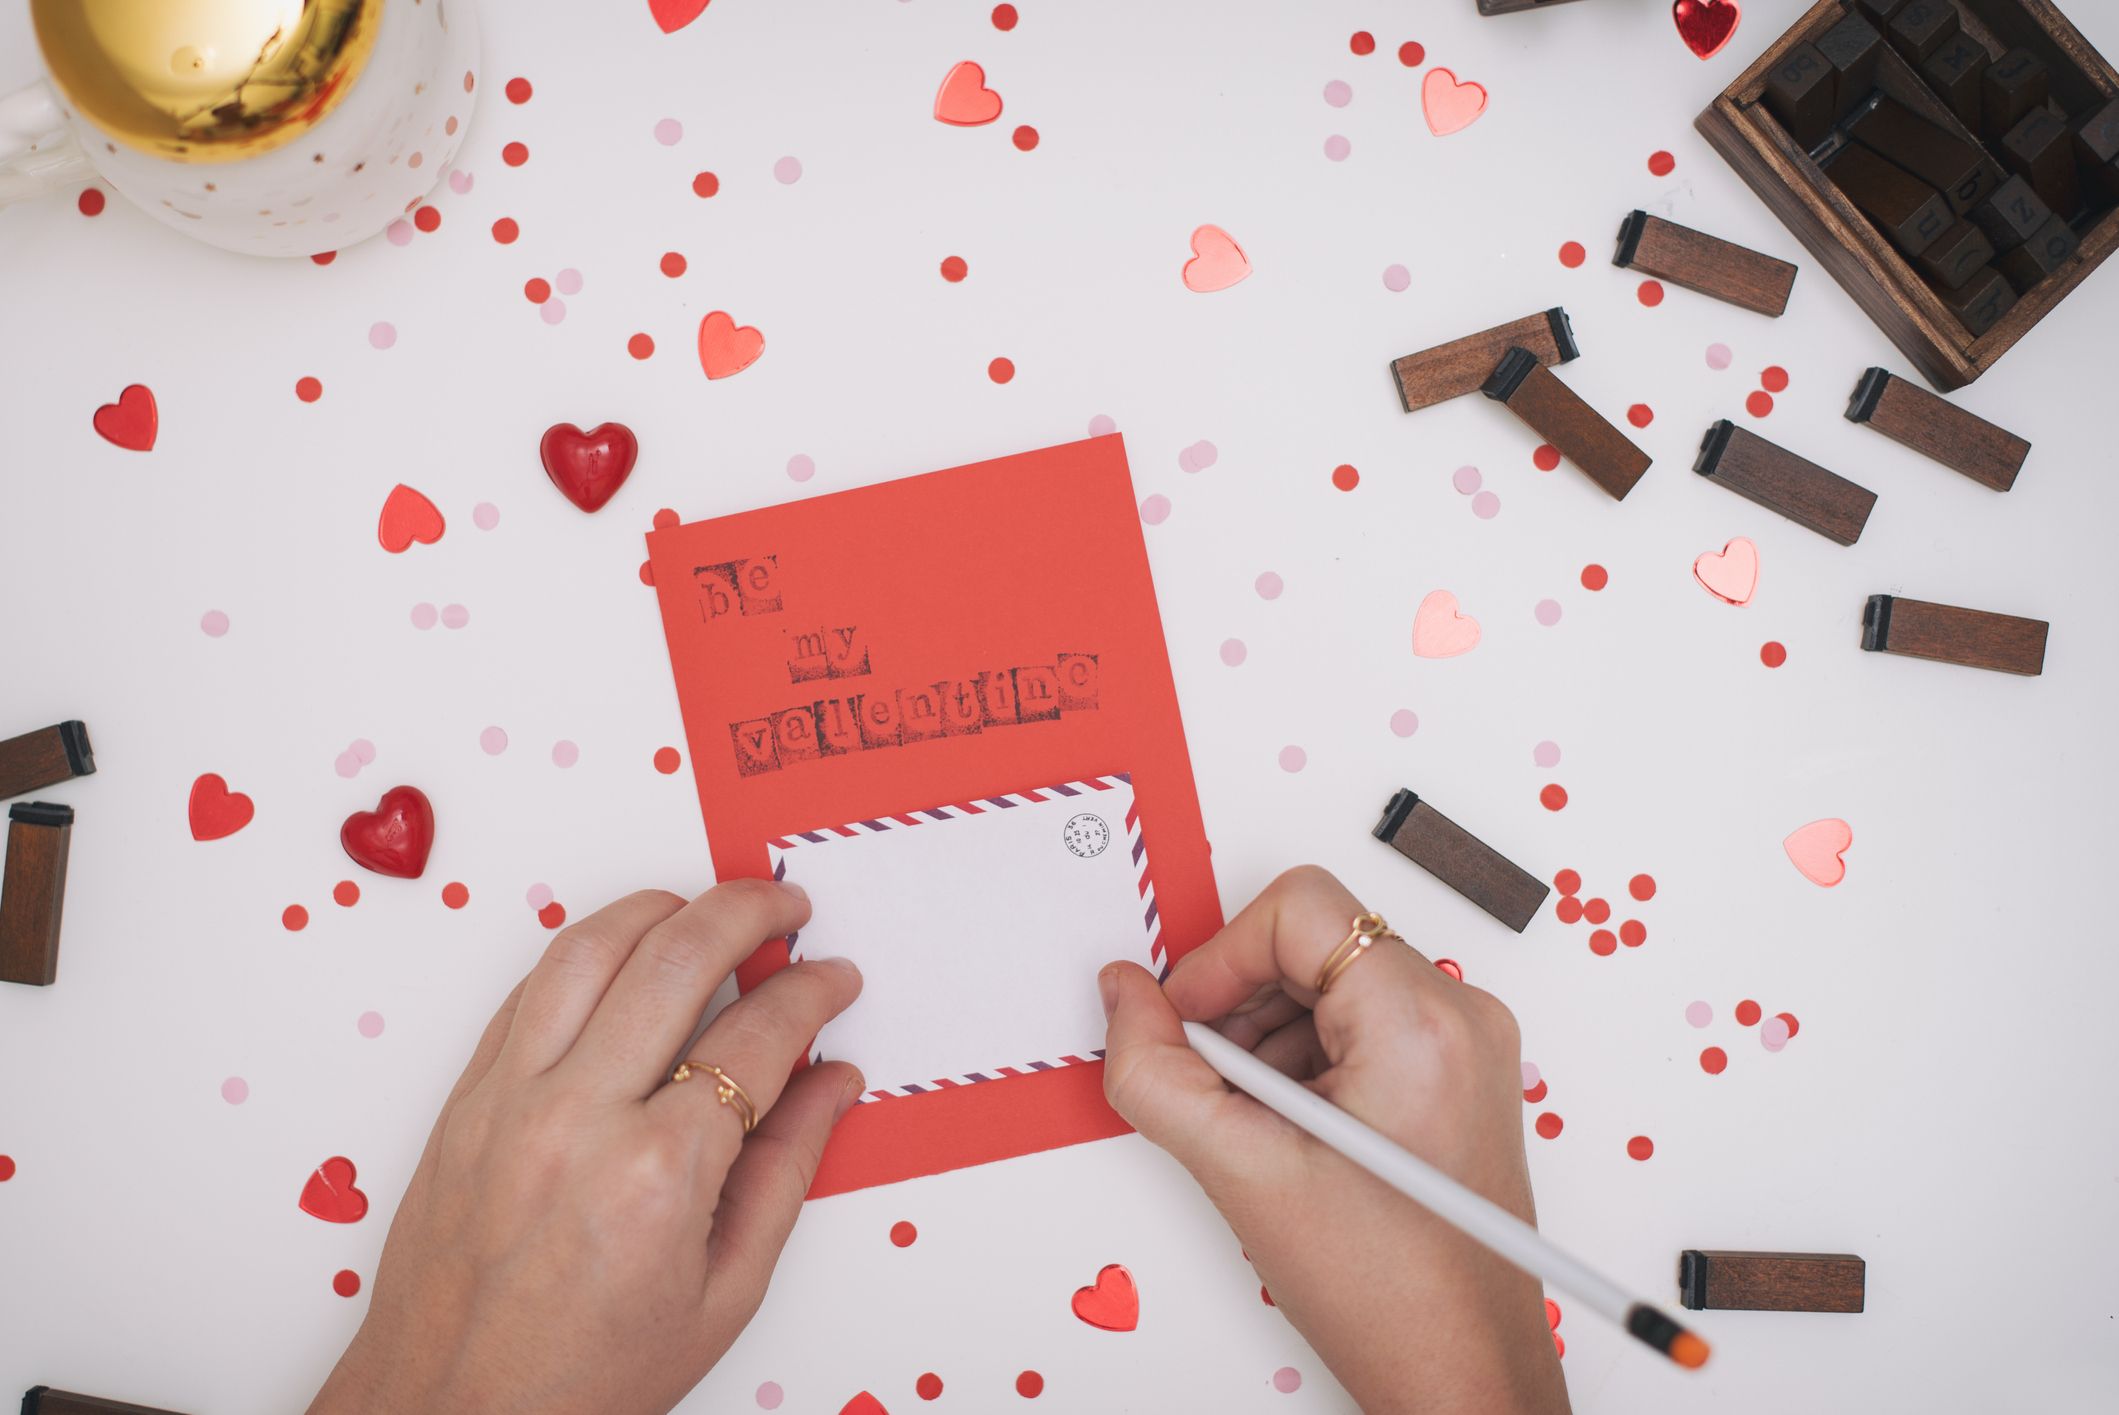 How to Write a Love Letter - Romantic Love Letter Ideas for Your